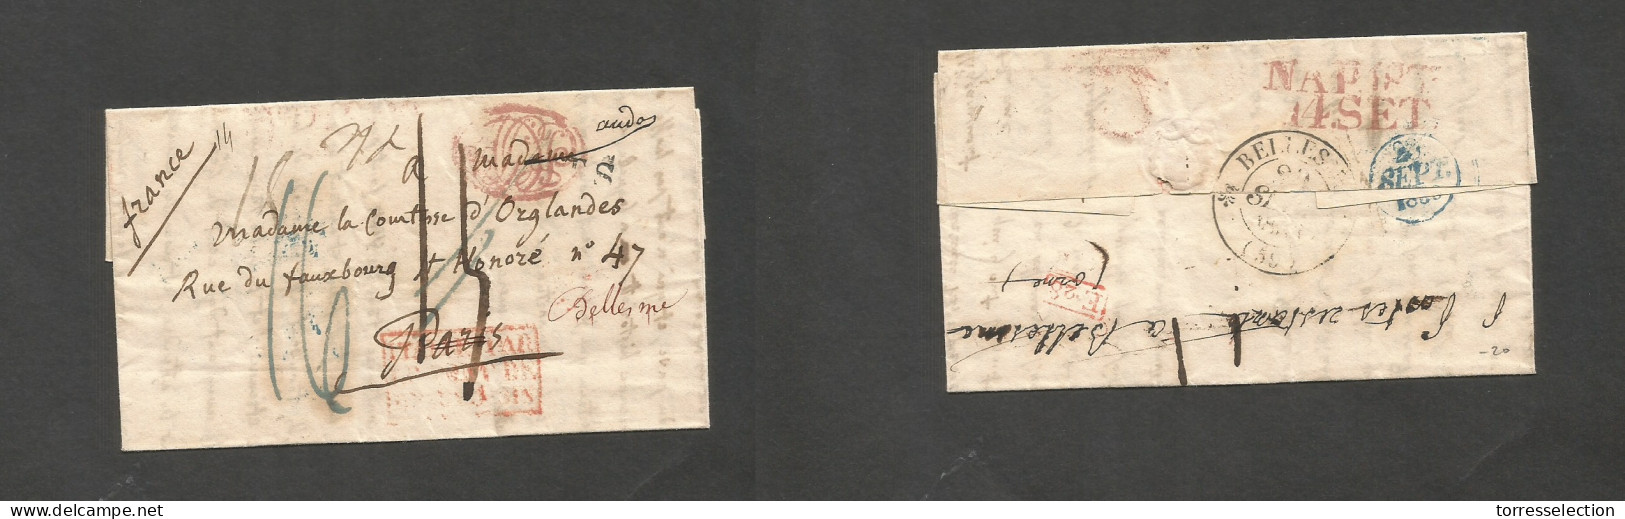 Italy - Prephilately. 1833 (14 Sept) Napoli - France, Paris, Fwded (29 Sept) Bellesme. Stampless E. With Text Several Tr - Non Classés